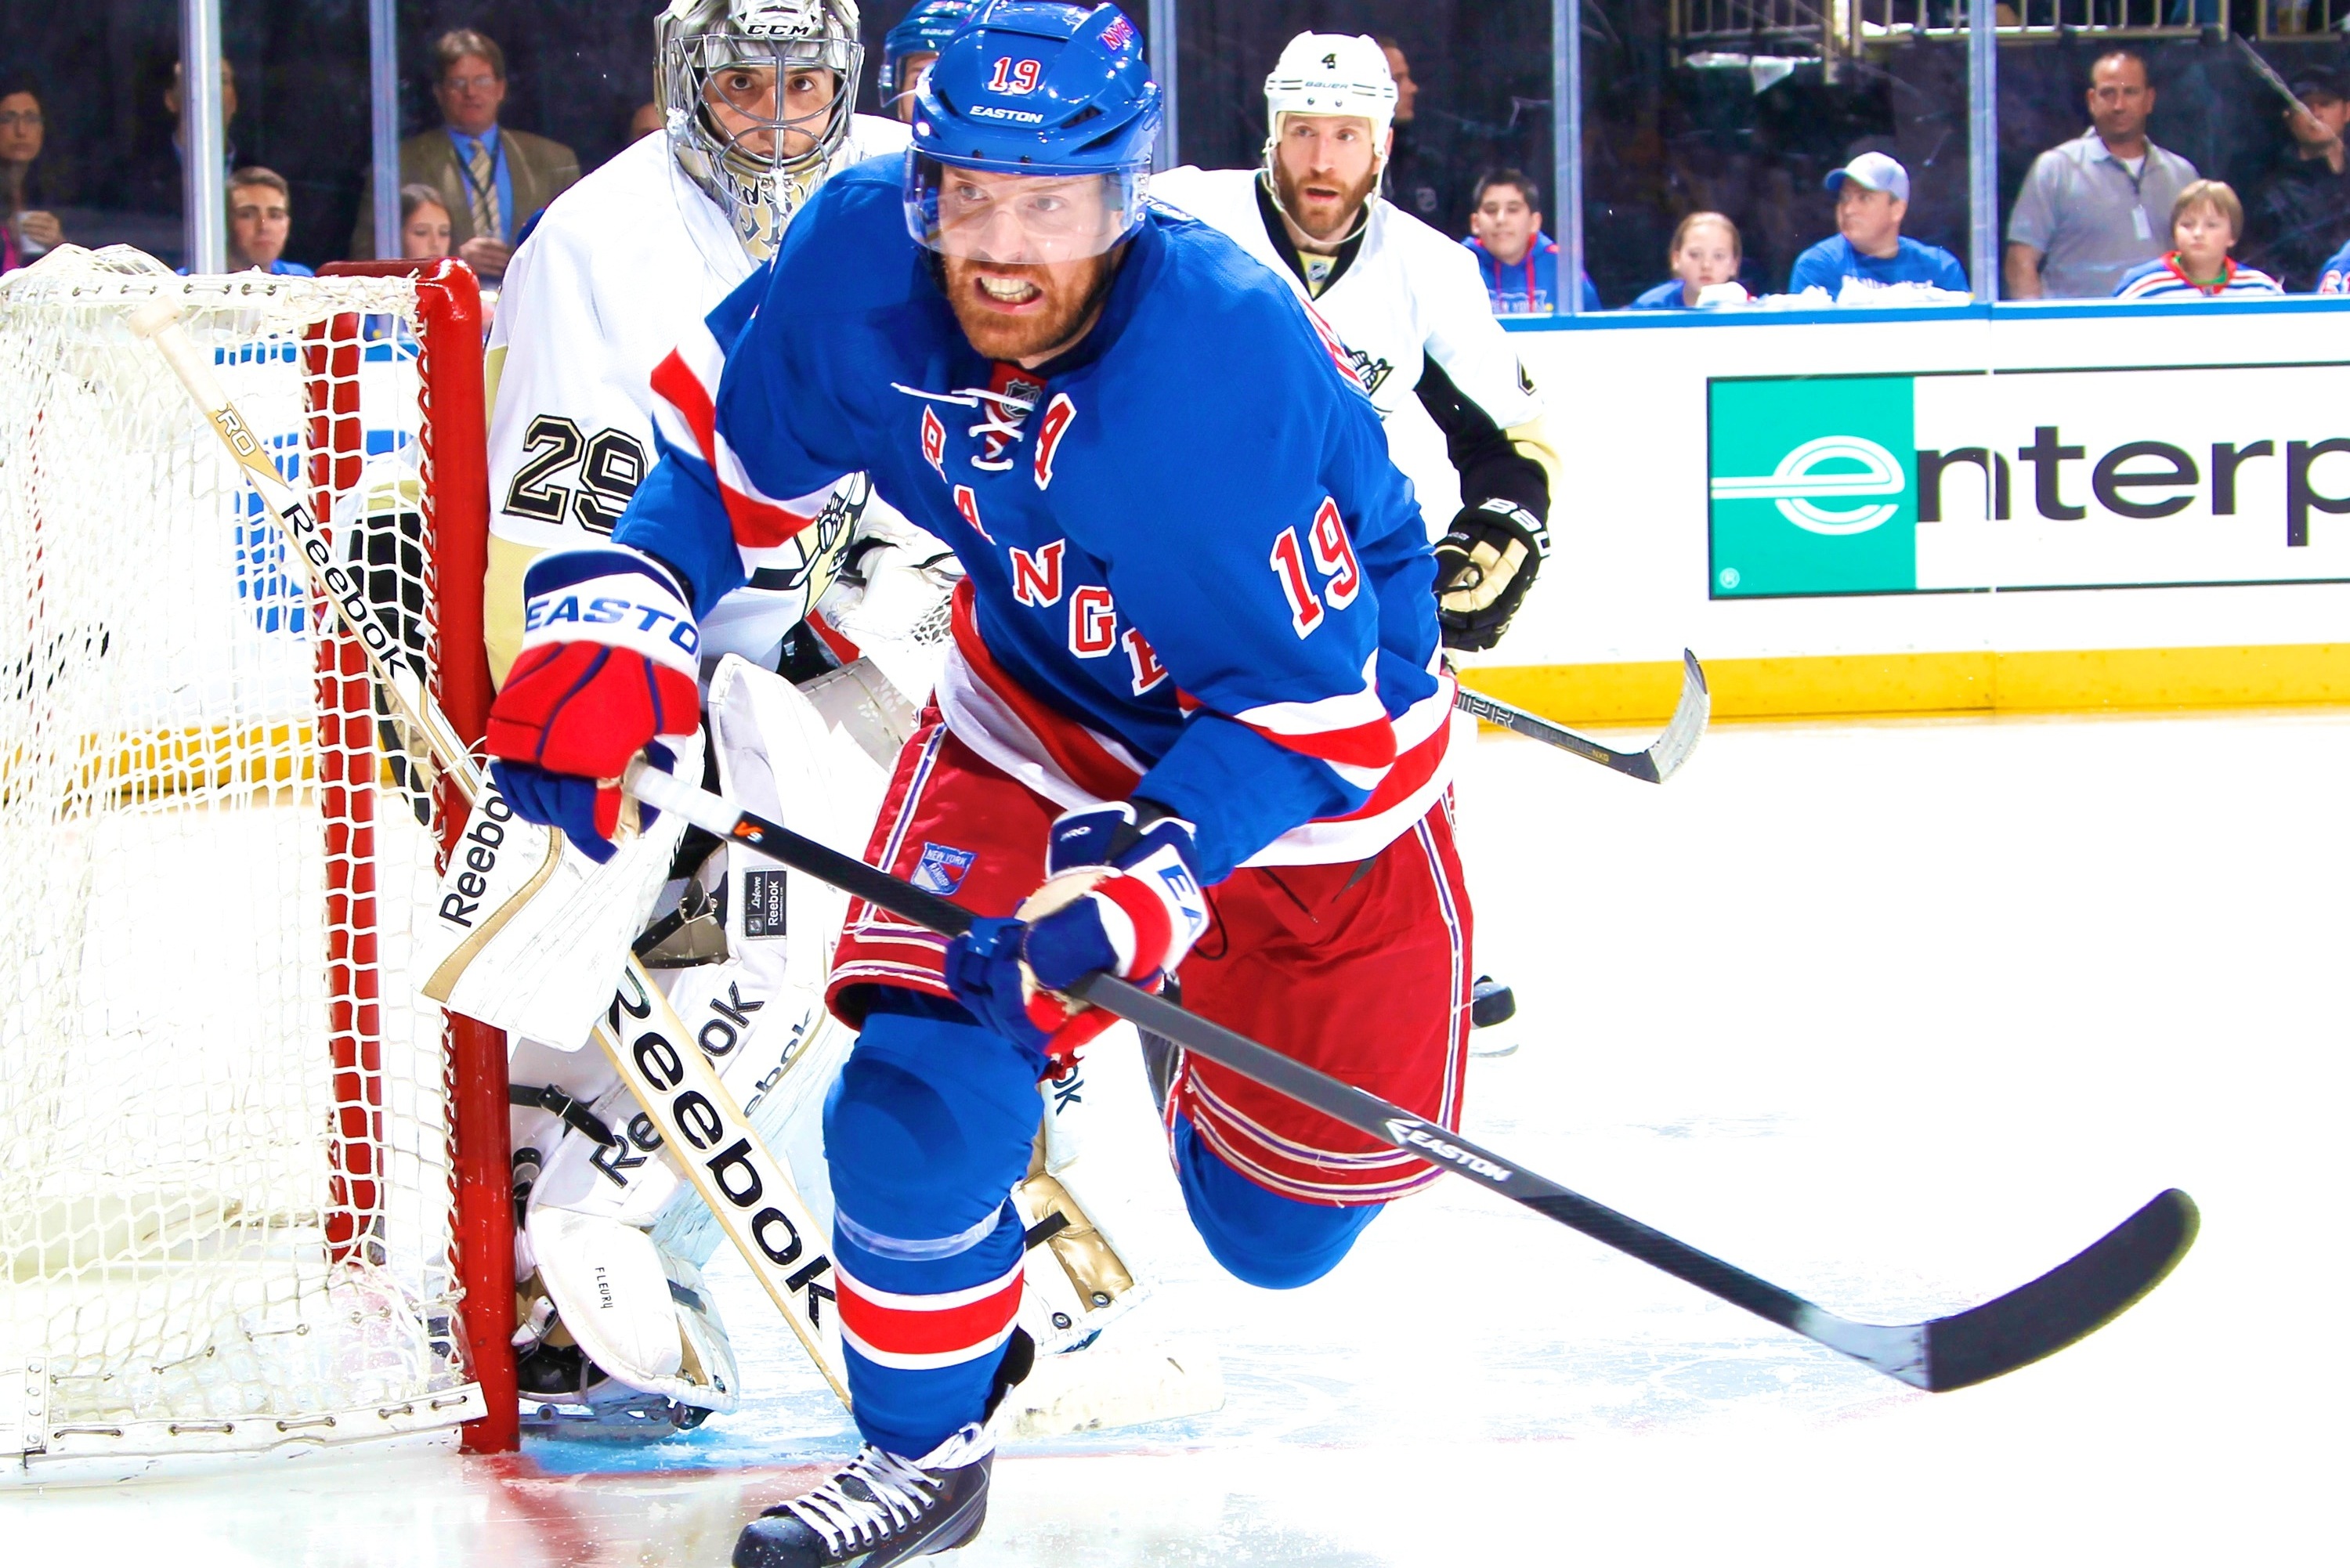 Rangers finding success with captain-less leadership